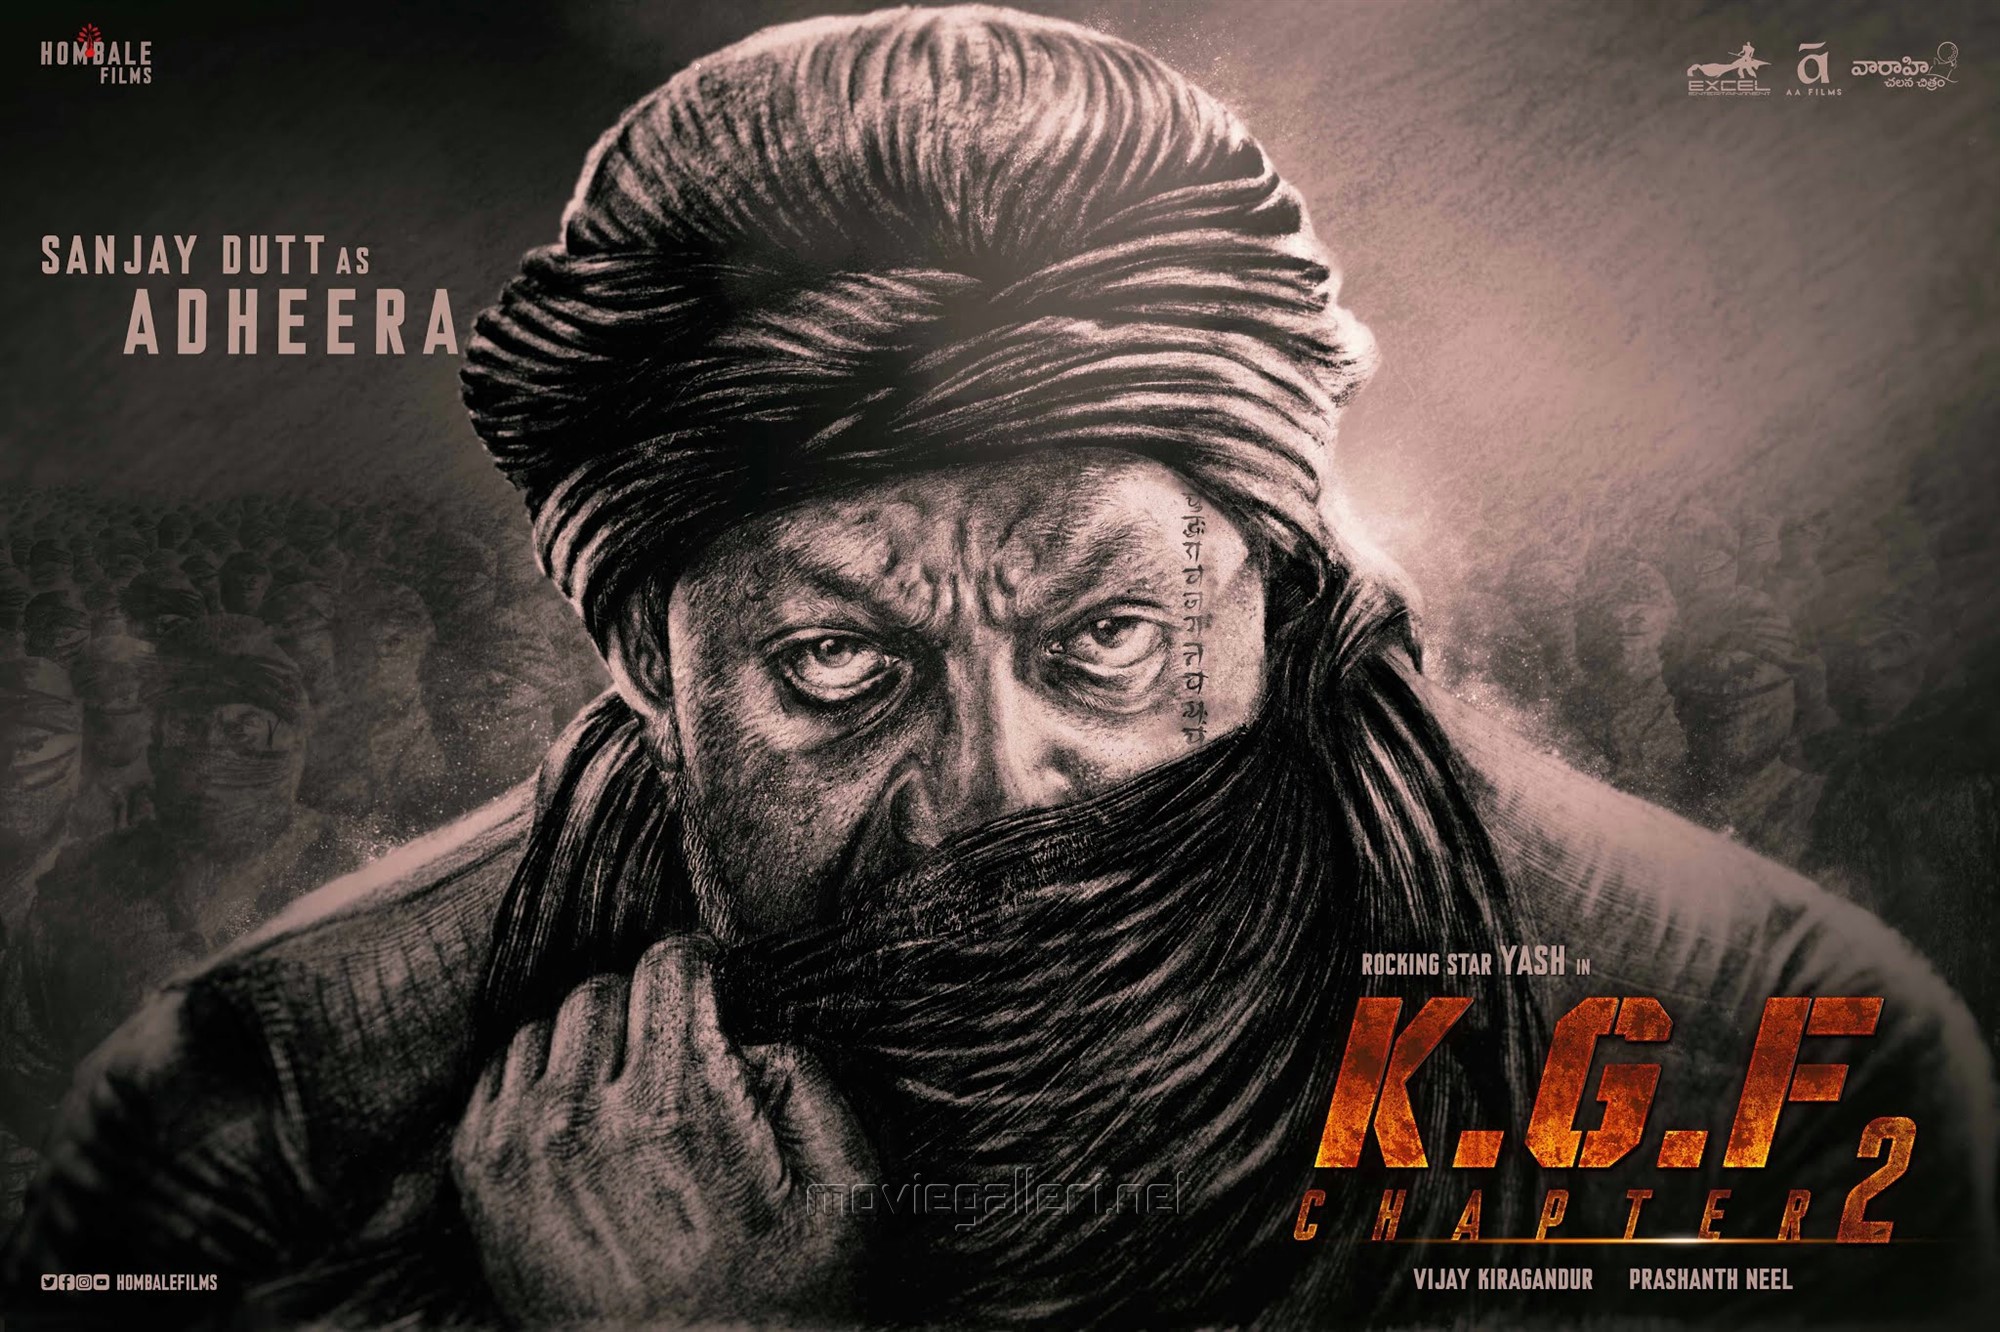 Actor Sanjay Dutt As Adheera In Kgf Chapter 2 Hd Poster New Movie Posters